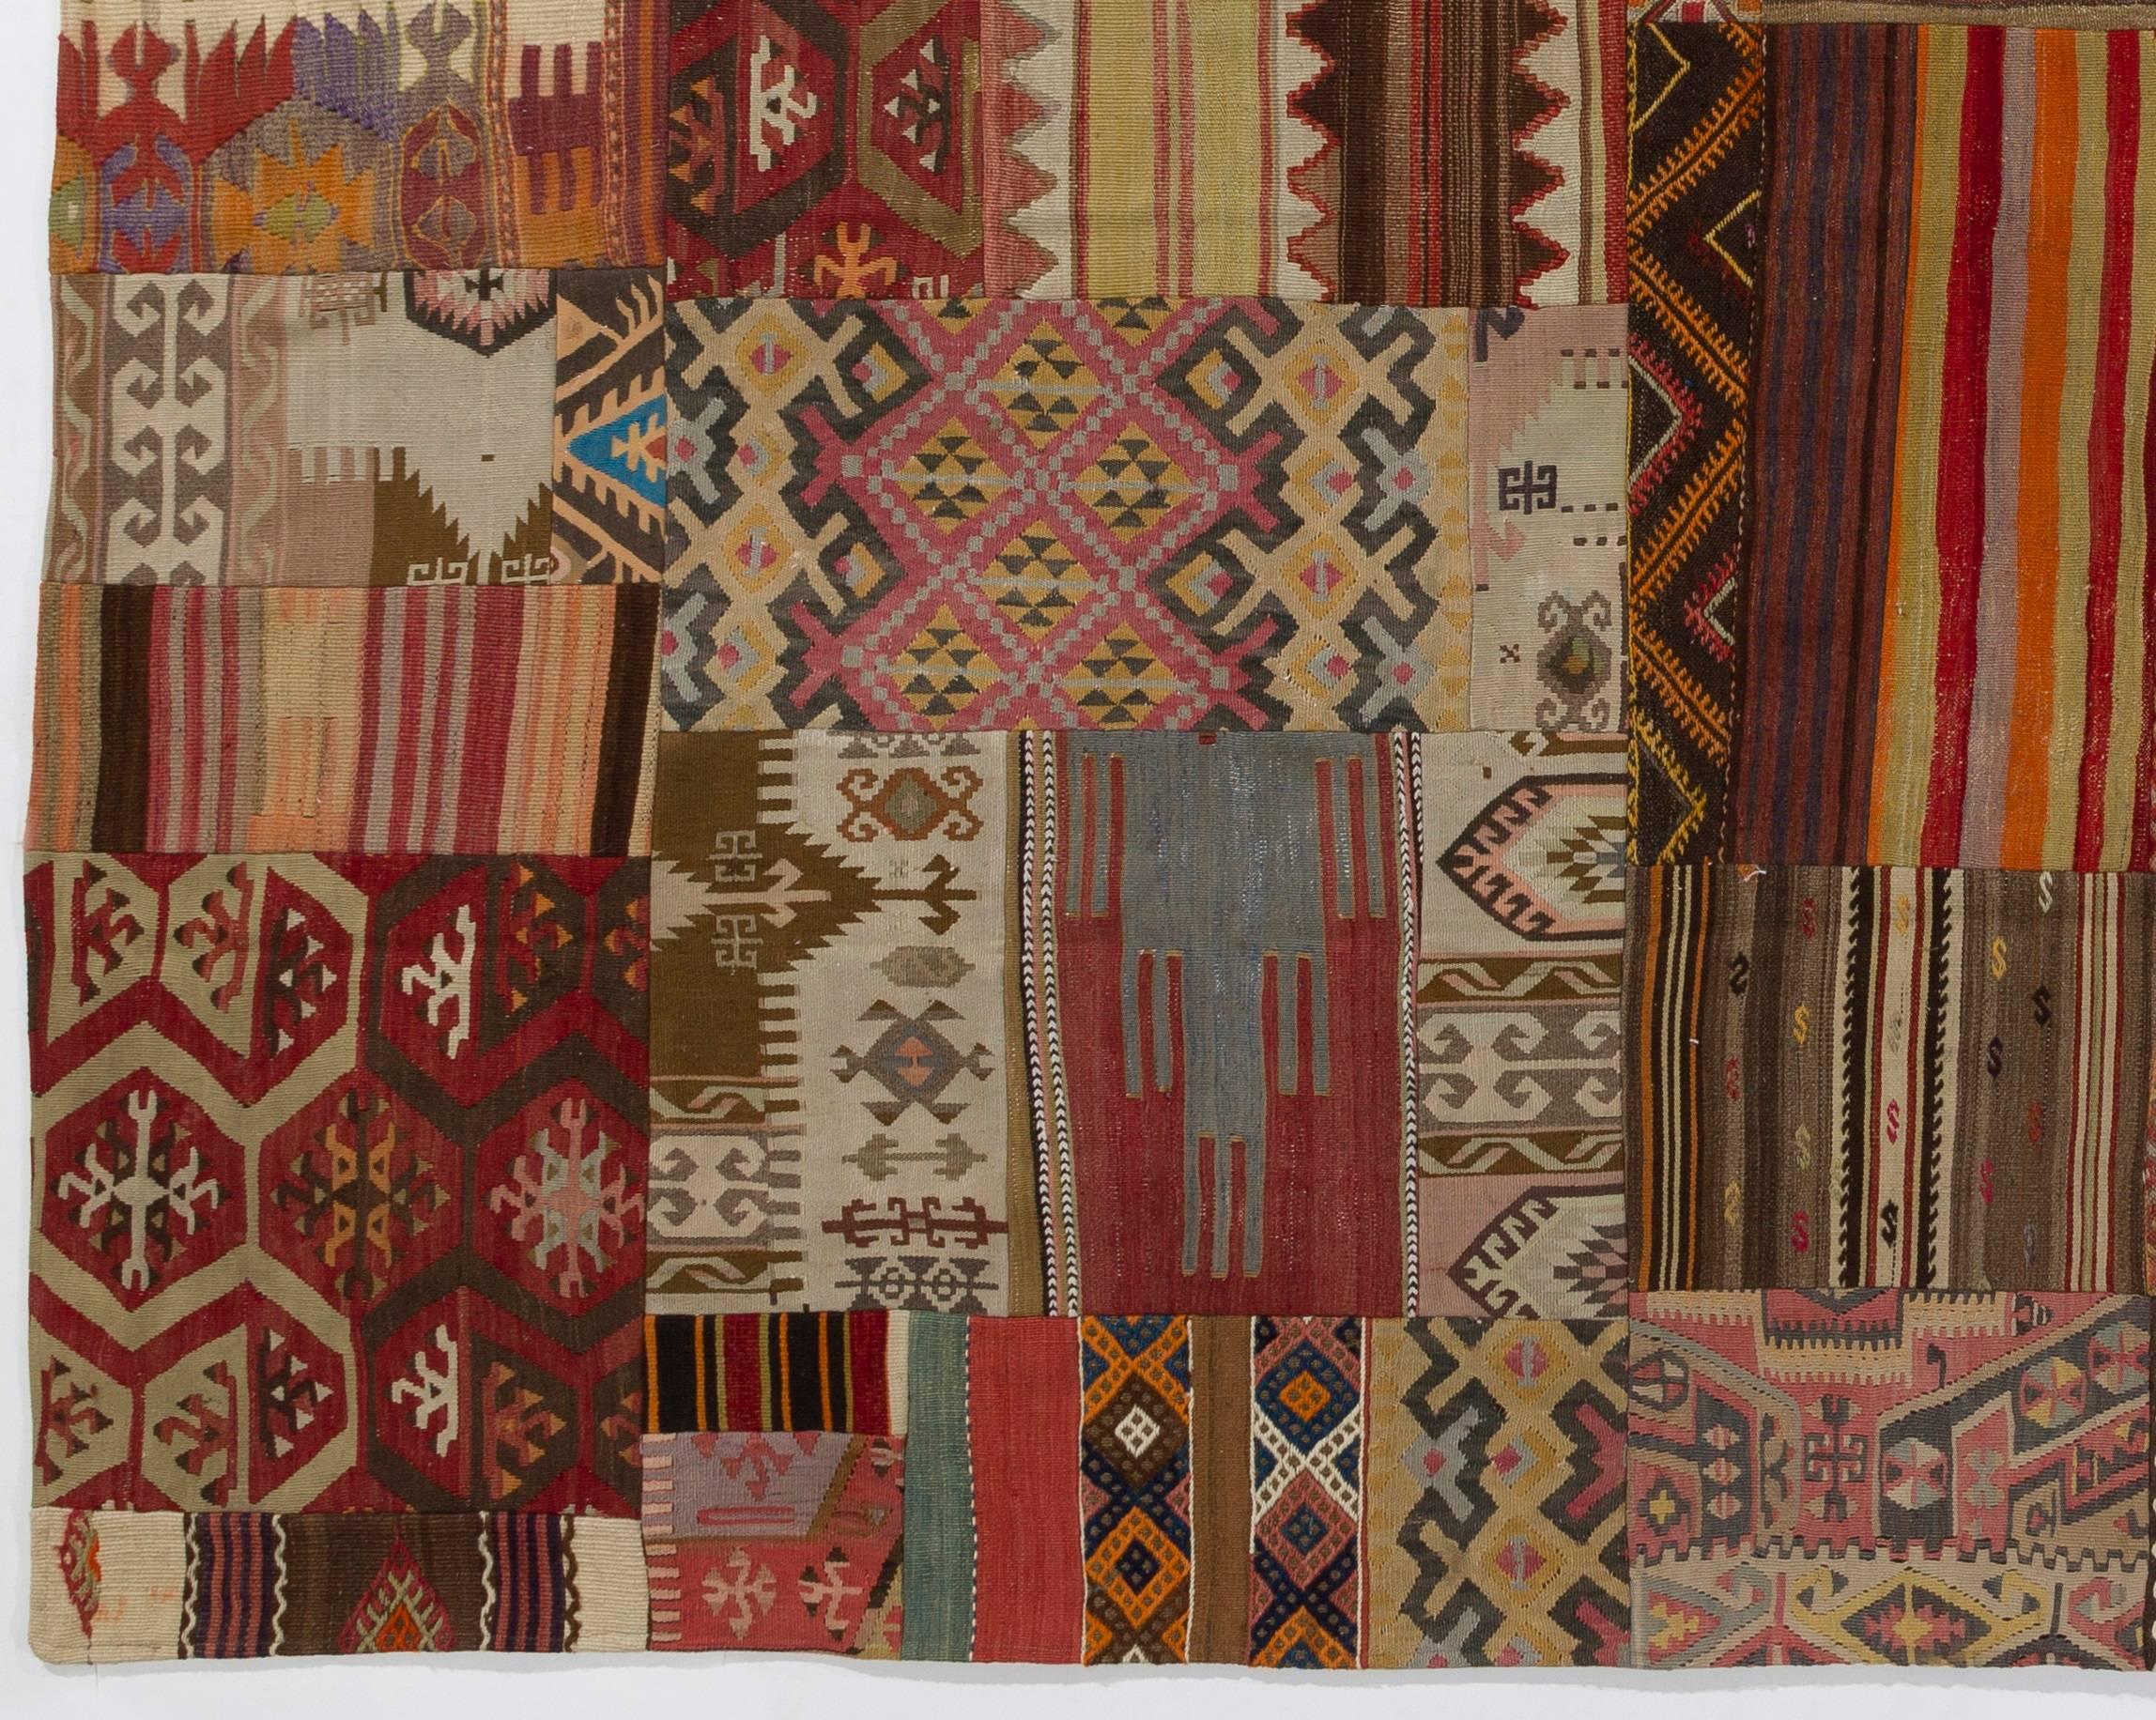 Woven Unique Patchwork Rug Made of Vintage Anatolian Kilims